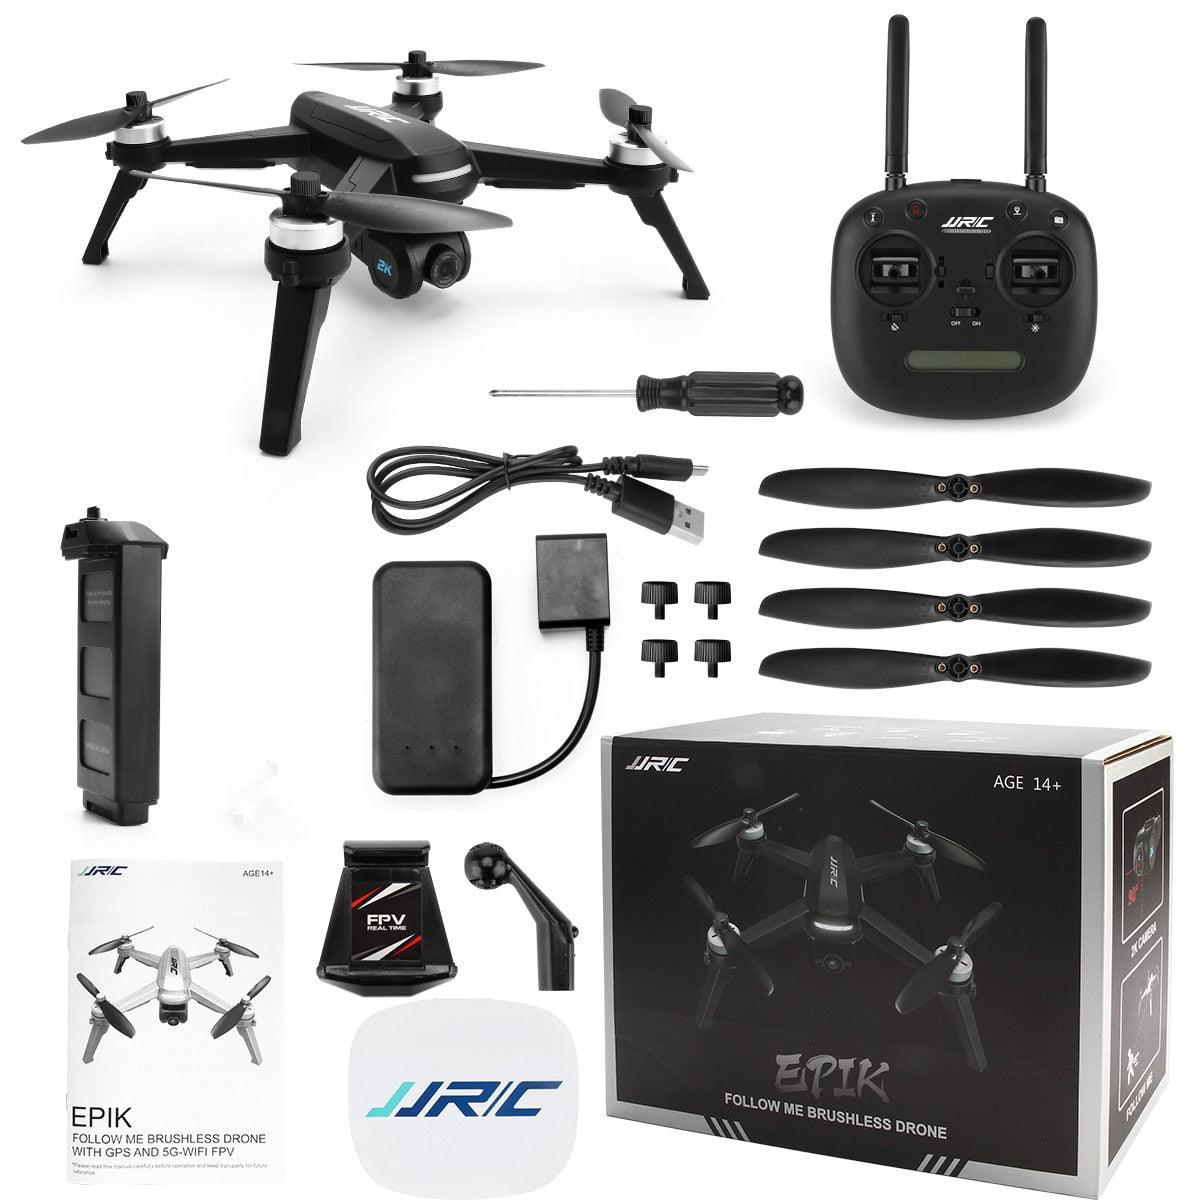 JJRC JJPRO X5 Drone - Brushless Drone with 2K FHD Camera Video 5G WiFi FPV GPS Drone for Adults, 30km/h 20 mins Flight Time Quadcopter - RCDrone